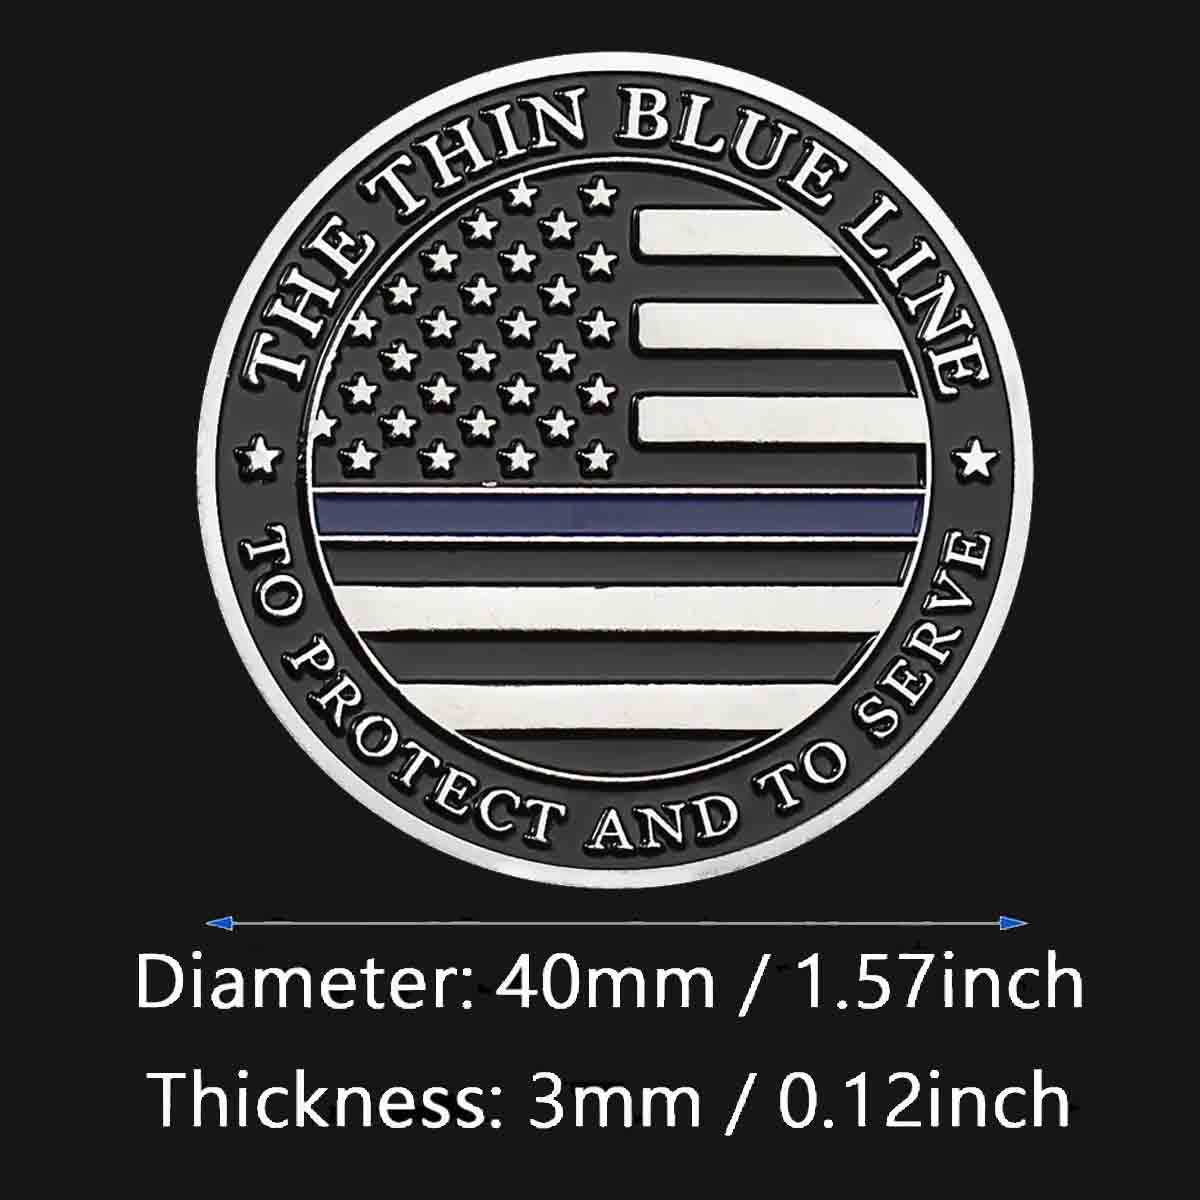 Police Officer Commemorative Challenge Coin. High-quality Silver plating for a stunning shine and durability. Perfect to honor the bravery and sacrifice of police officers. This coin comes in a protective plastic case to preserve its beauty and value. Patriot Gear USA